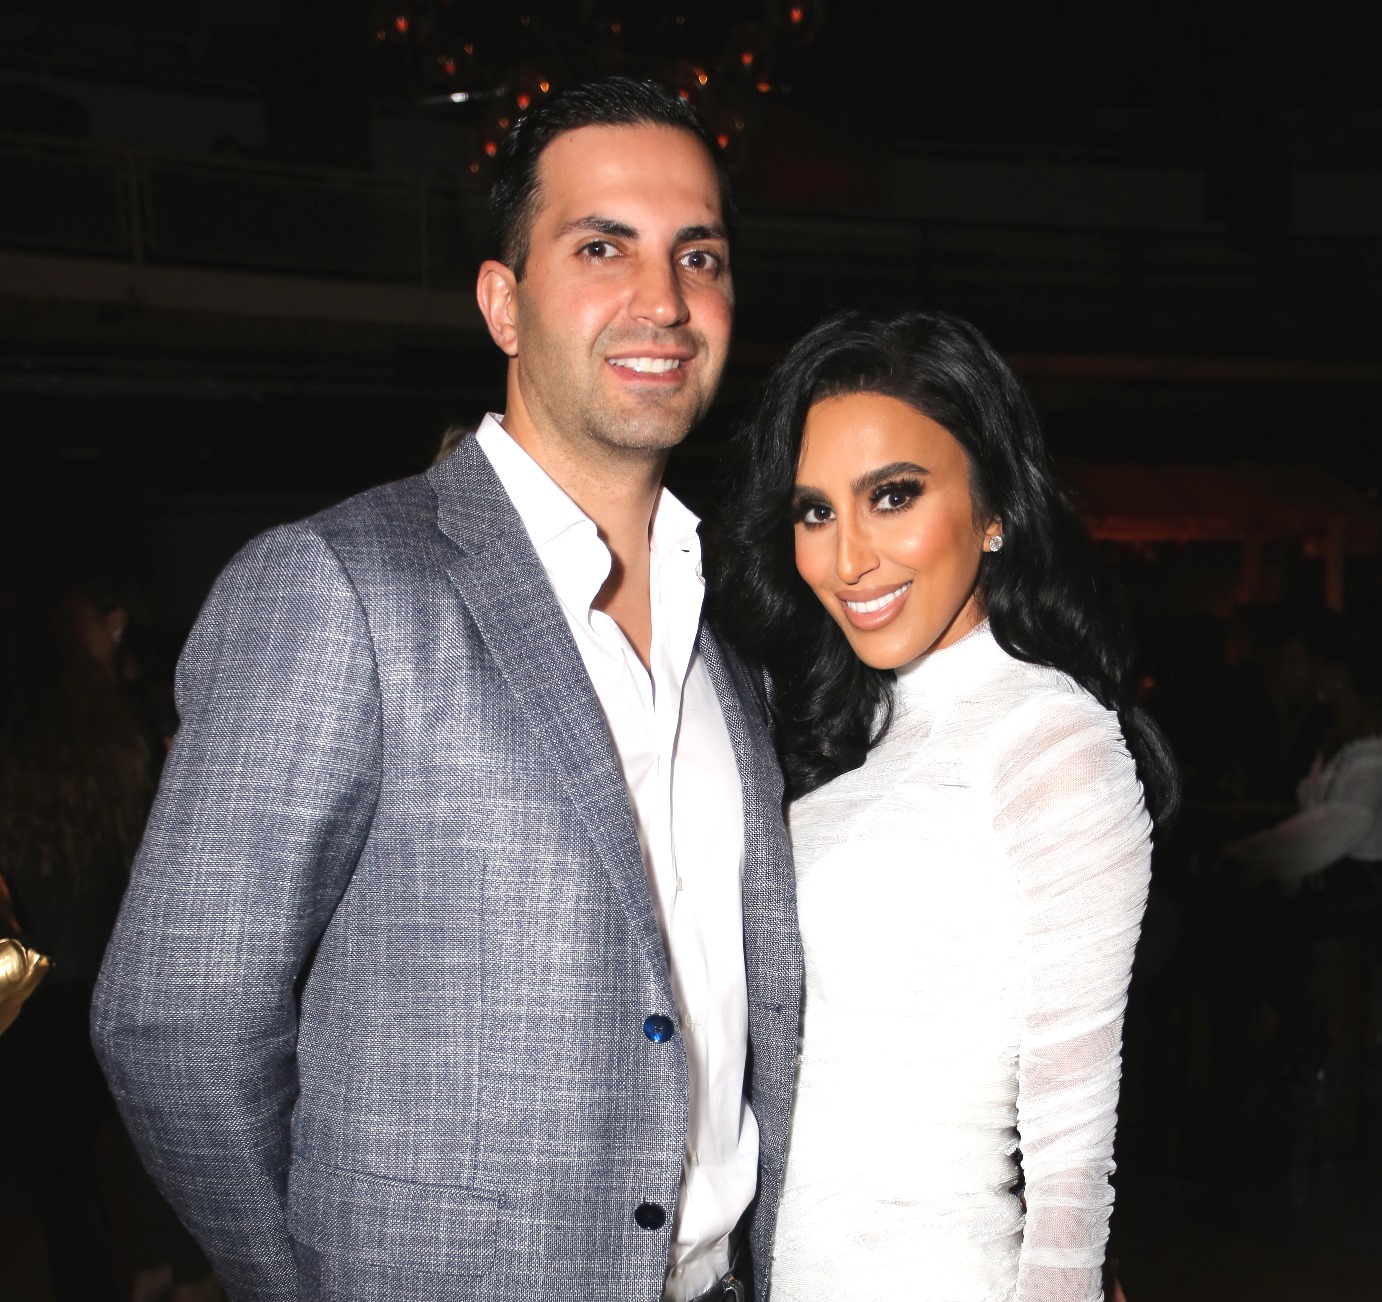 EXCLUSIVE: Lilly Ghalichi Dismisses Her Divorce Filing as Ex Shahs of Sunset Star Reunites With Husband Dara Mir For Daughter’s Birthday